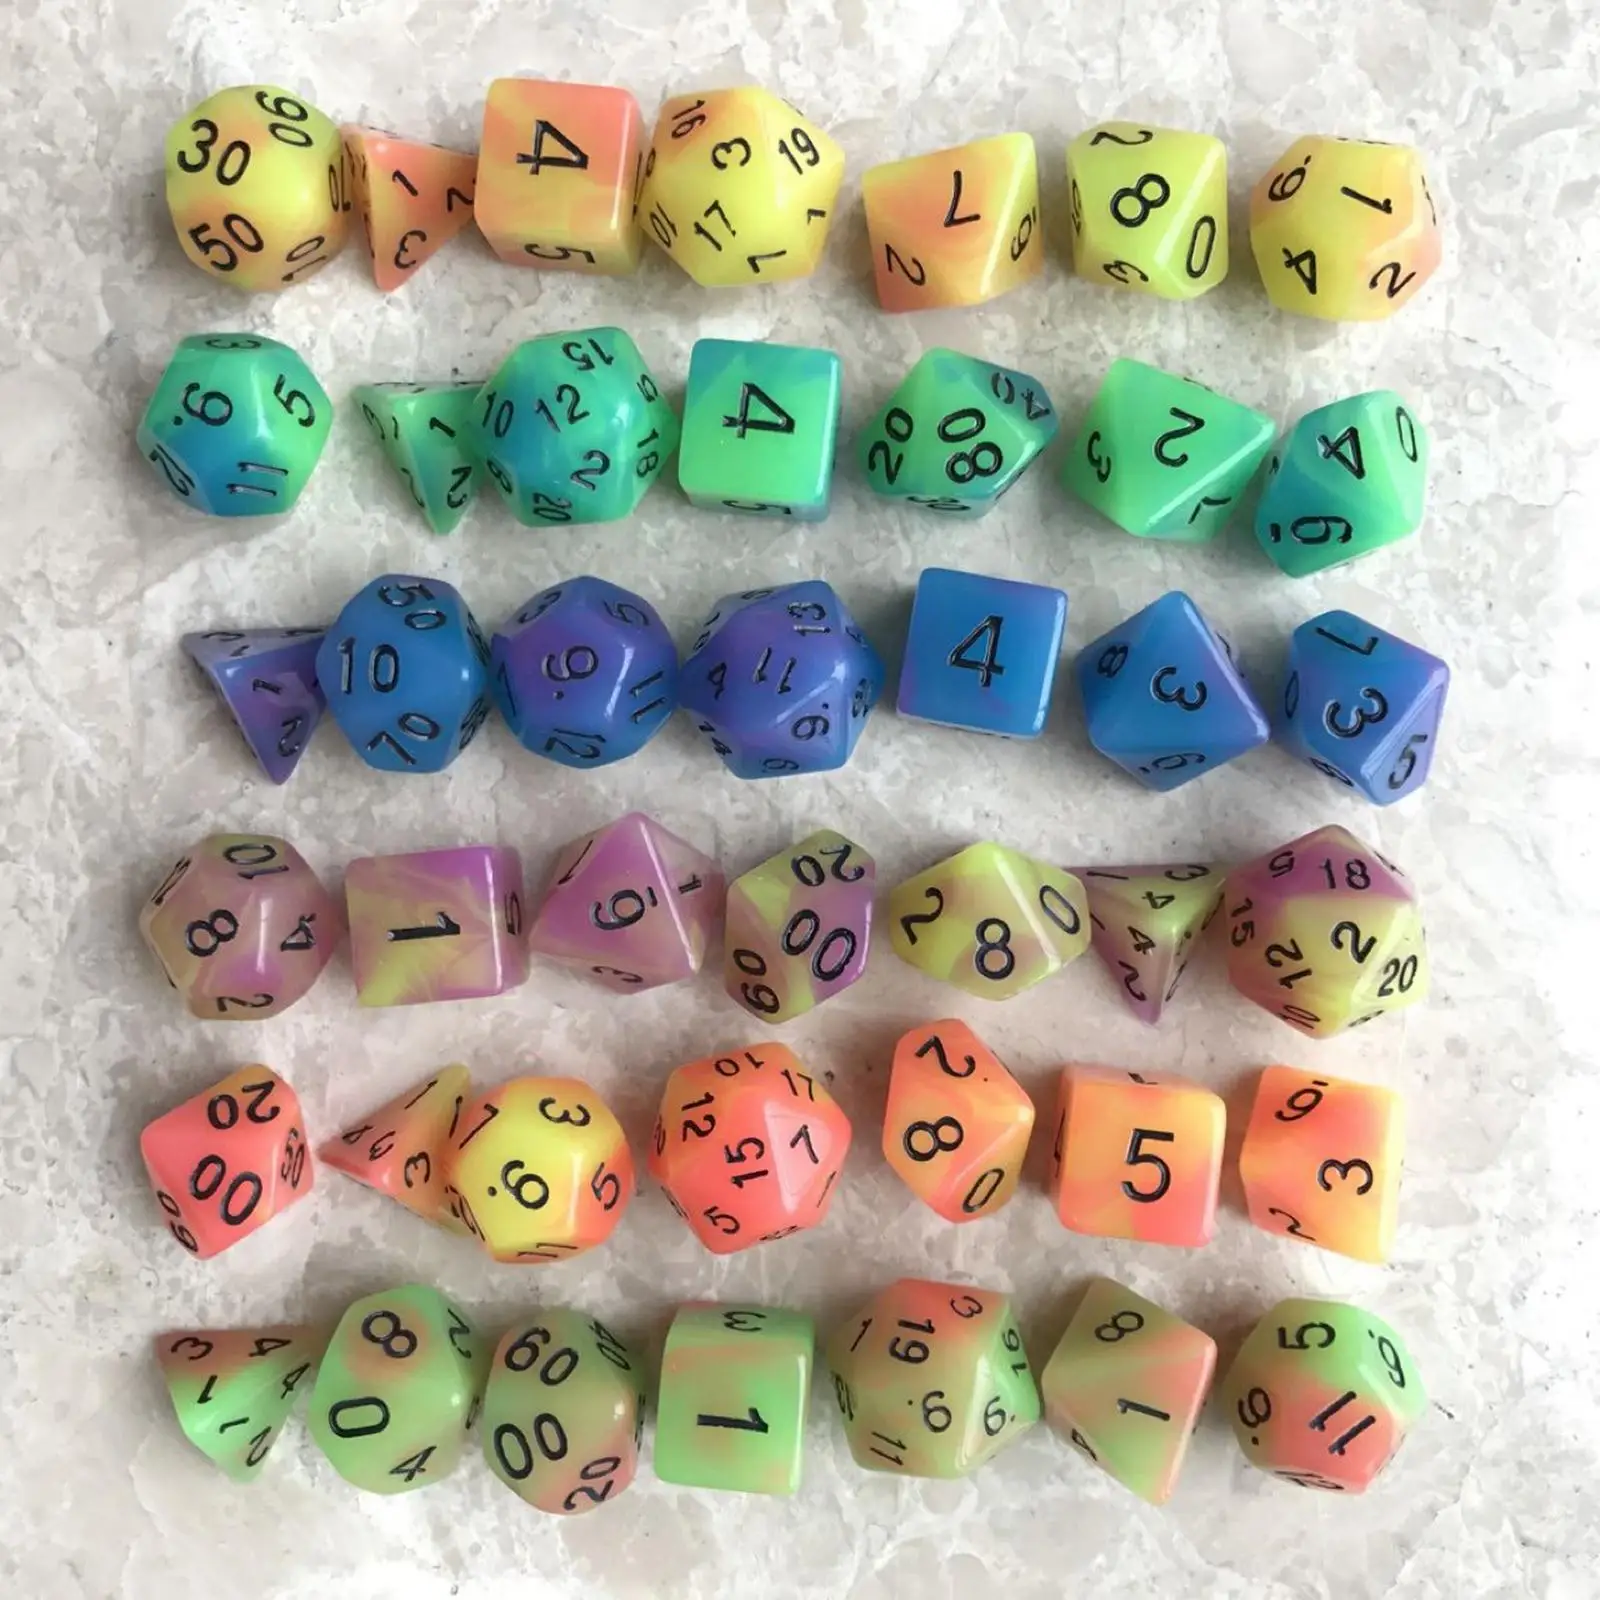 Acrylic Luminous RPG Dices Set with Pouch Bar Toys, Polyhedral Dices Set for MTG RPG Board Game Math Teaching